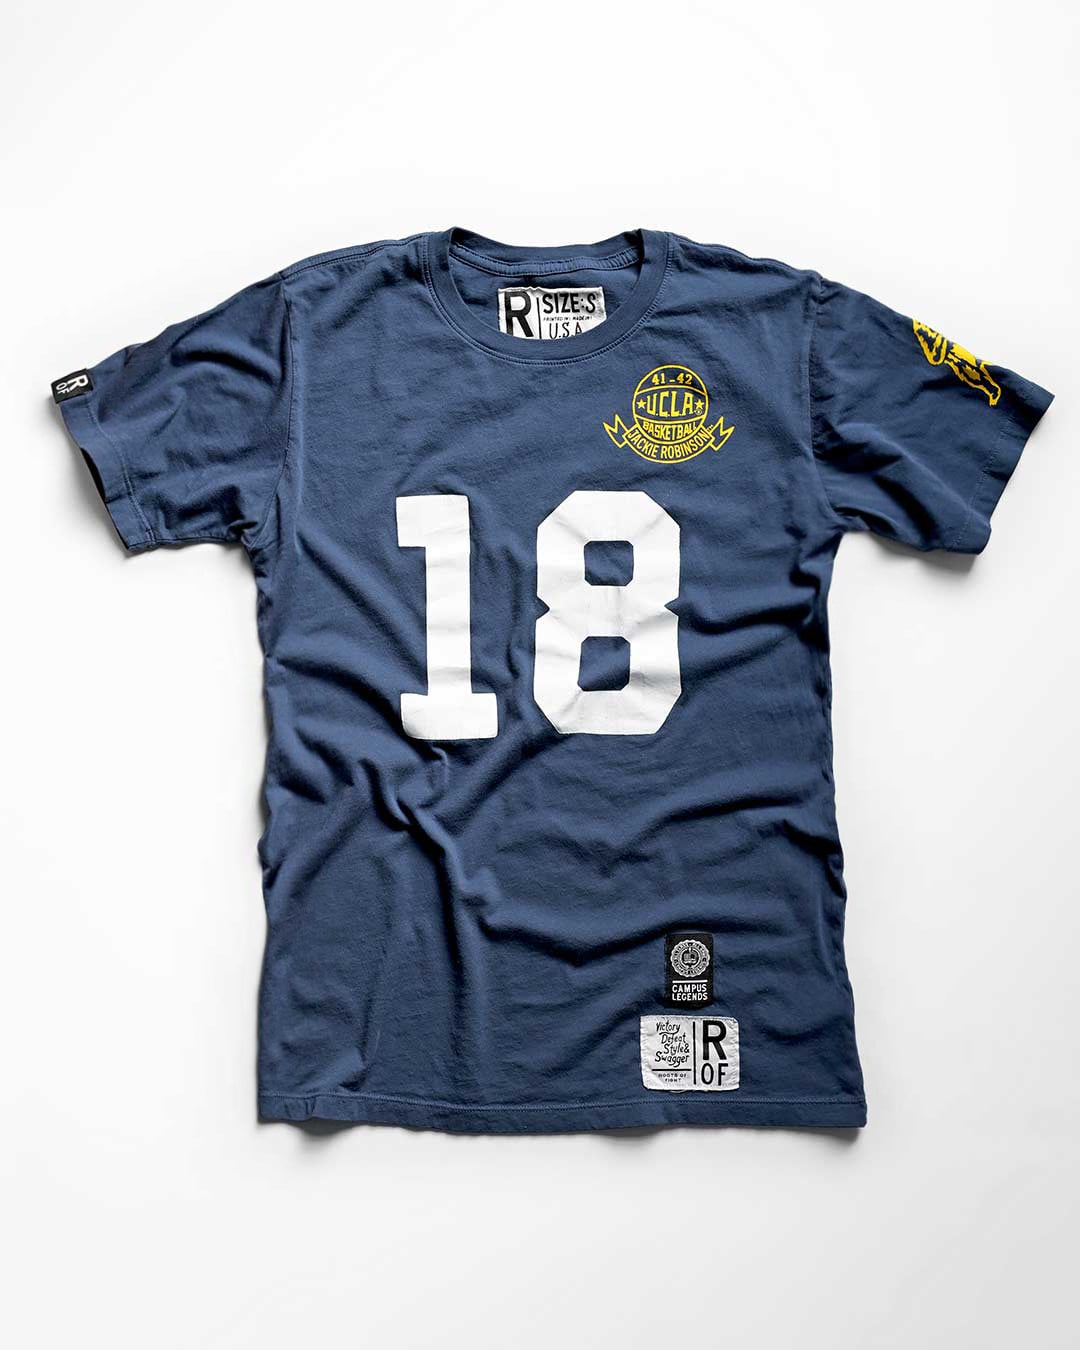 UCLA - Jackie Robinson Basketball #18 Navy Tee - Roots of Fight